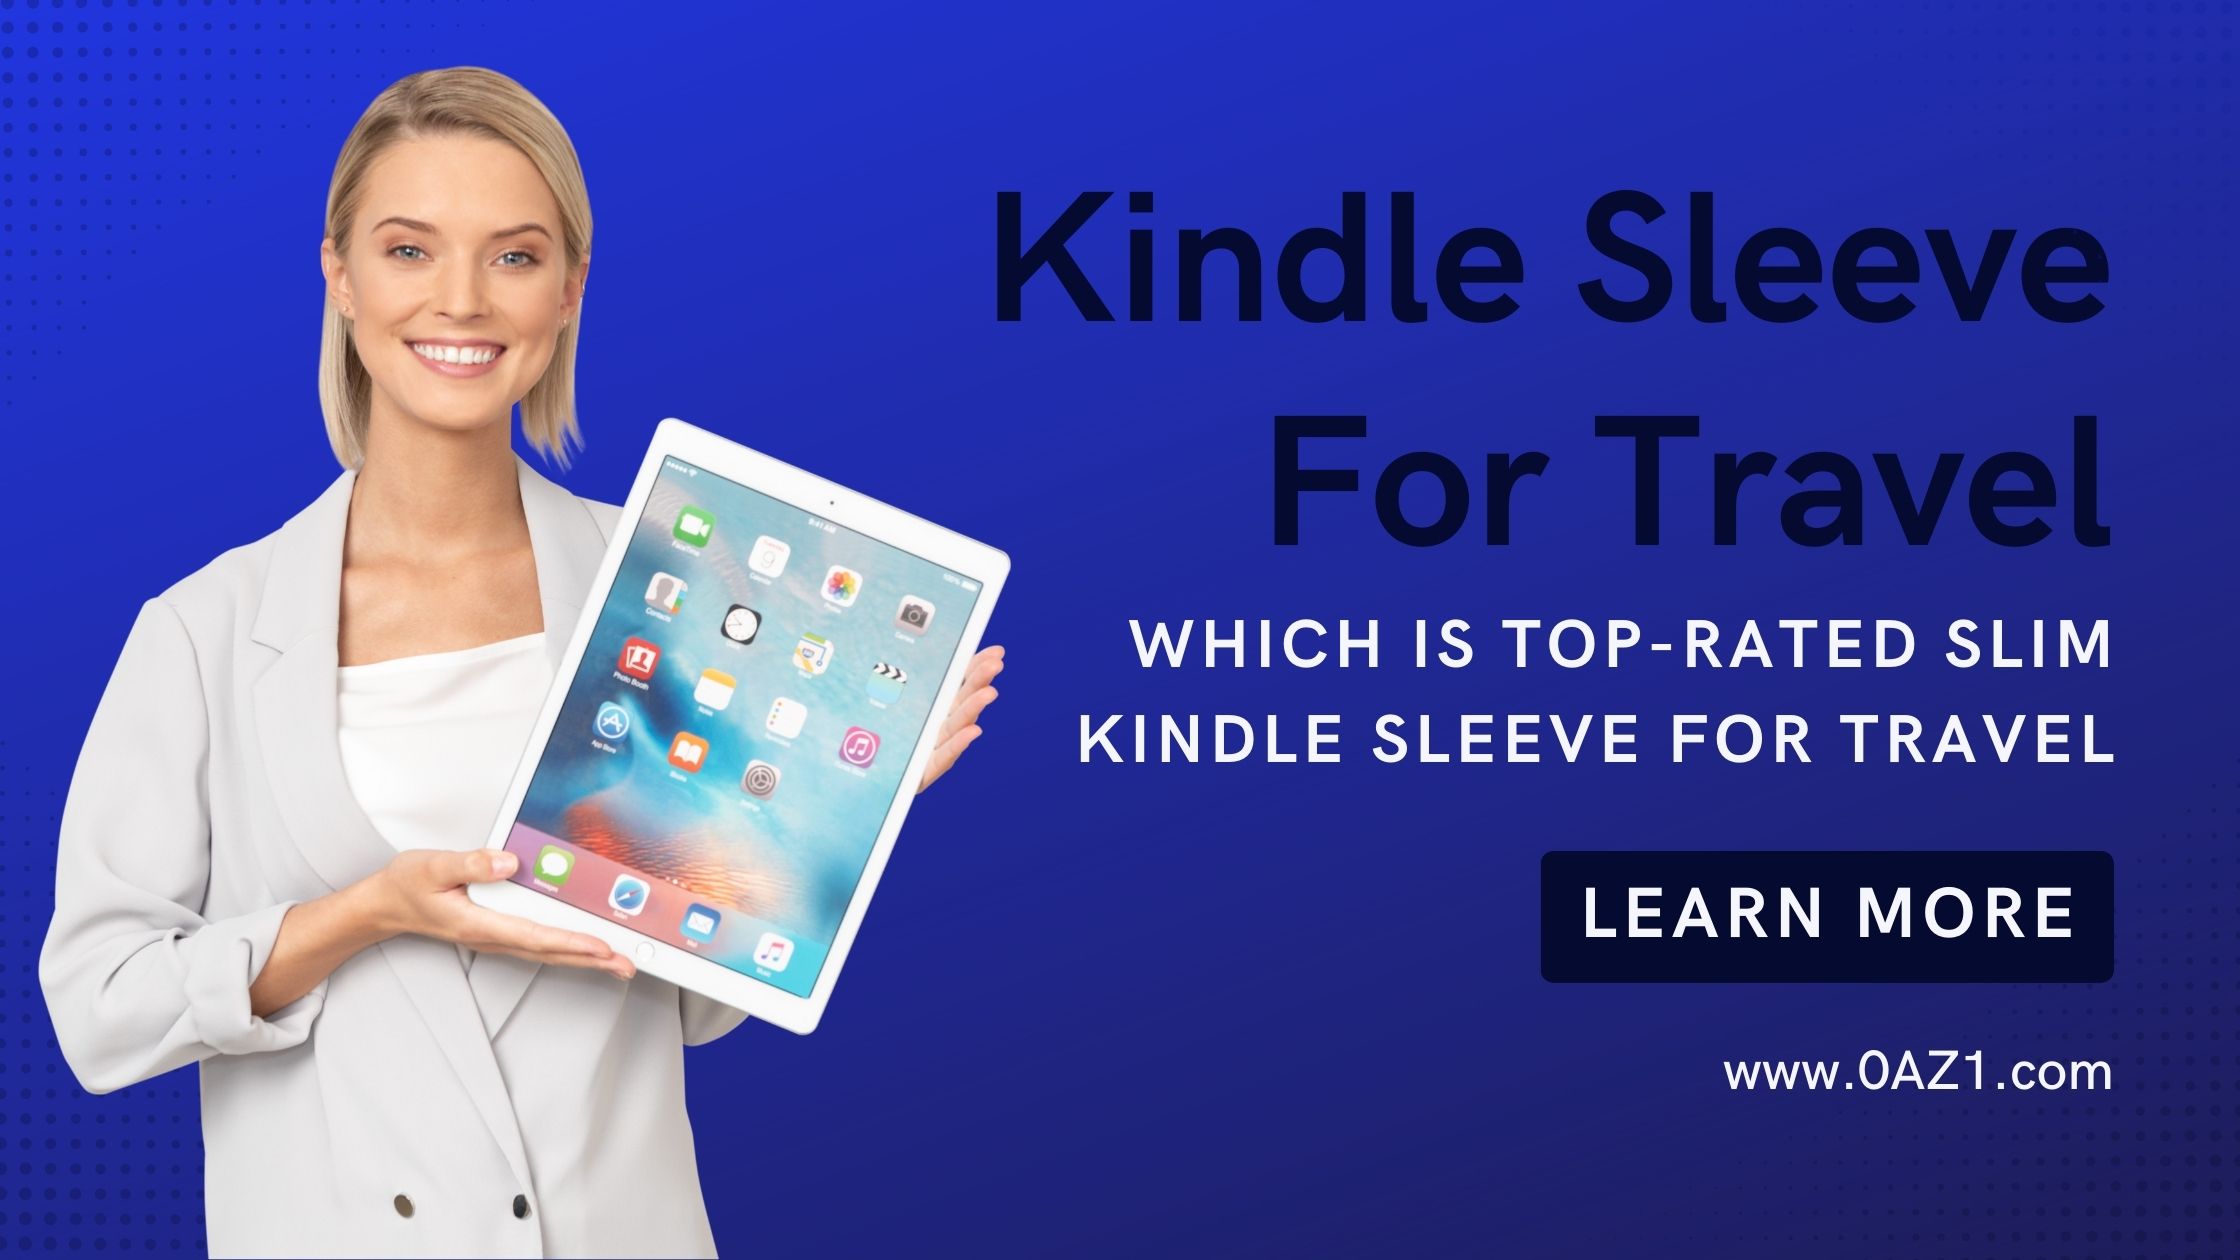 Which Is Top-Rated Slim Kindle Sleeve For Travel